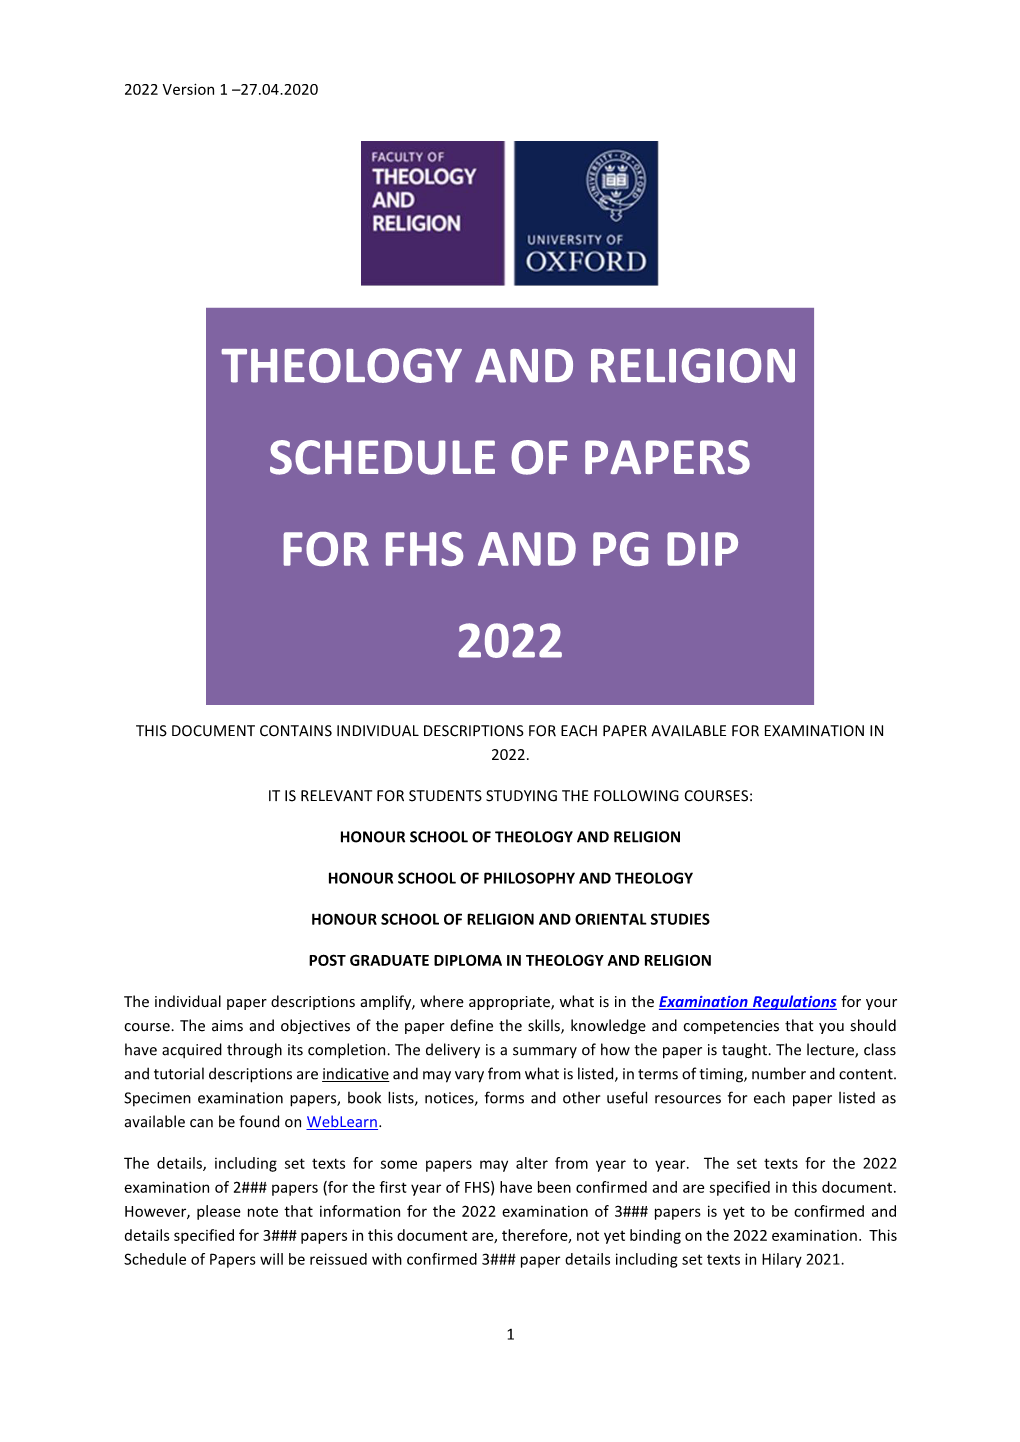 Theology and Religion Schedule of Papers for FHS and PG Dip for Examination in 2022